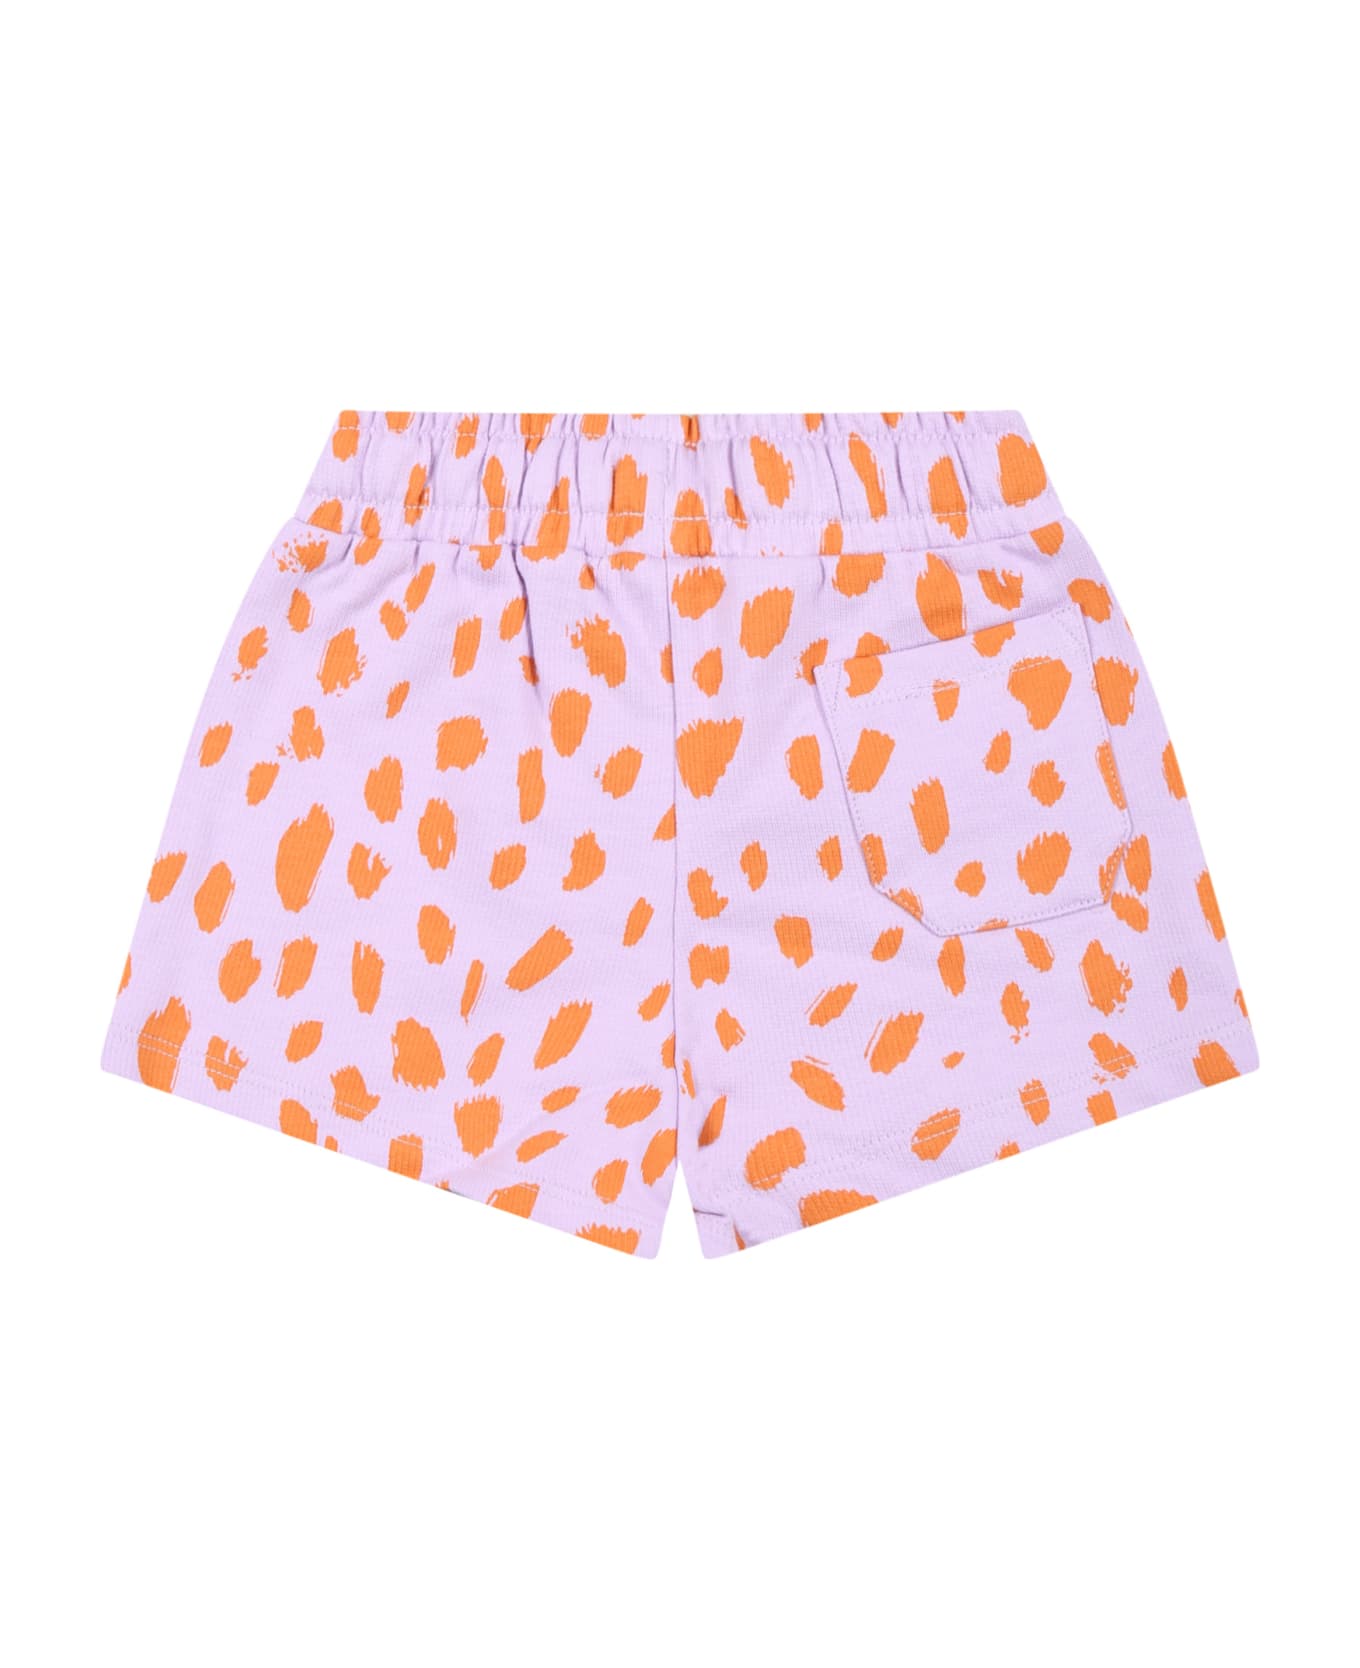 Stella McCartney Kids Purple Shorts For Baby Girl With Animal Print - Violet